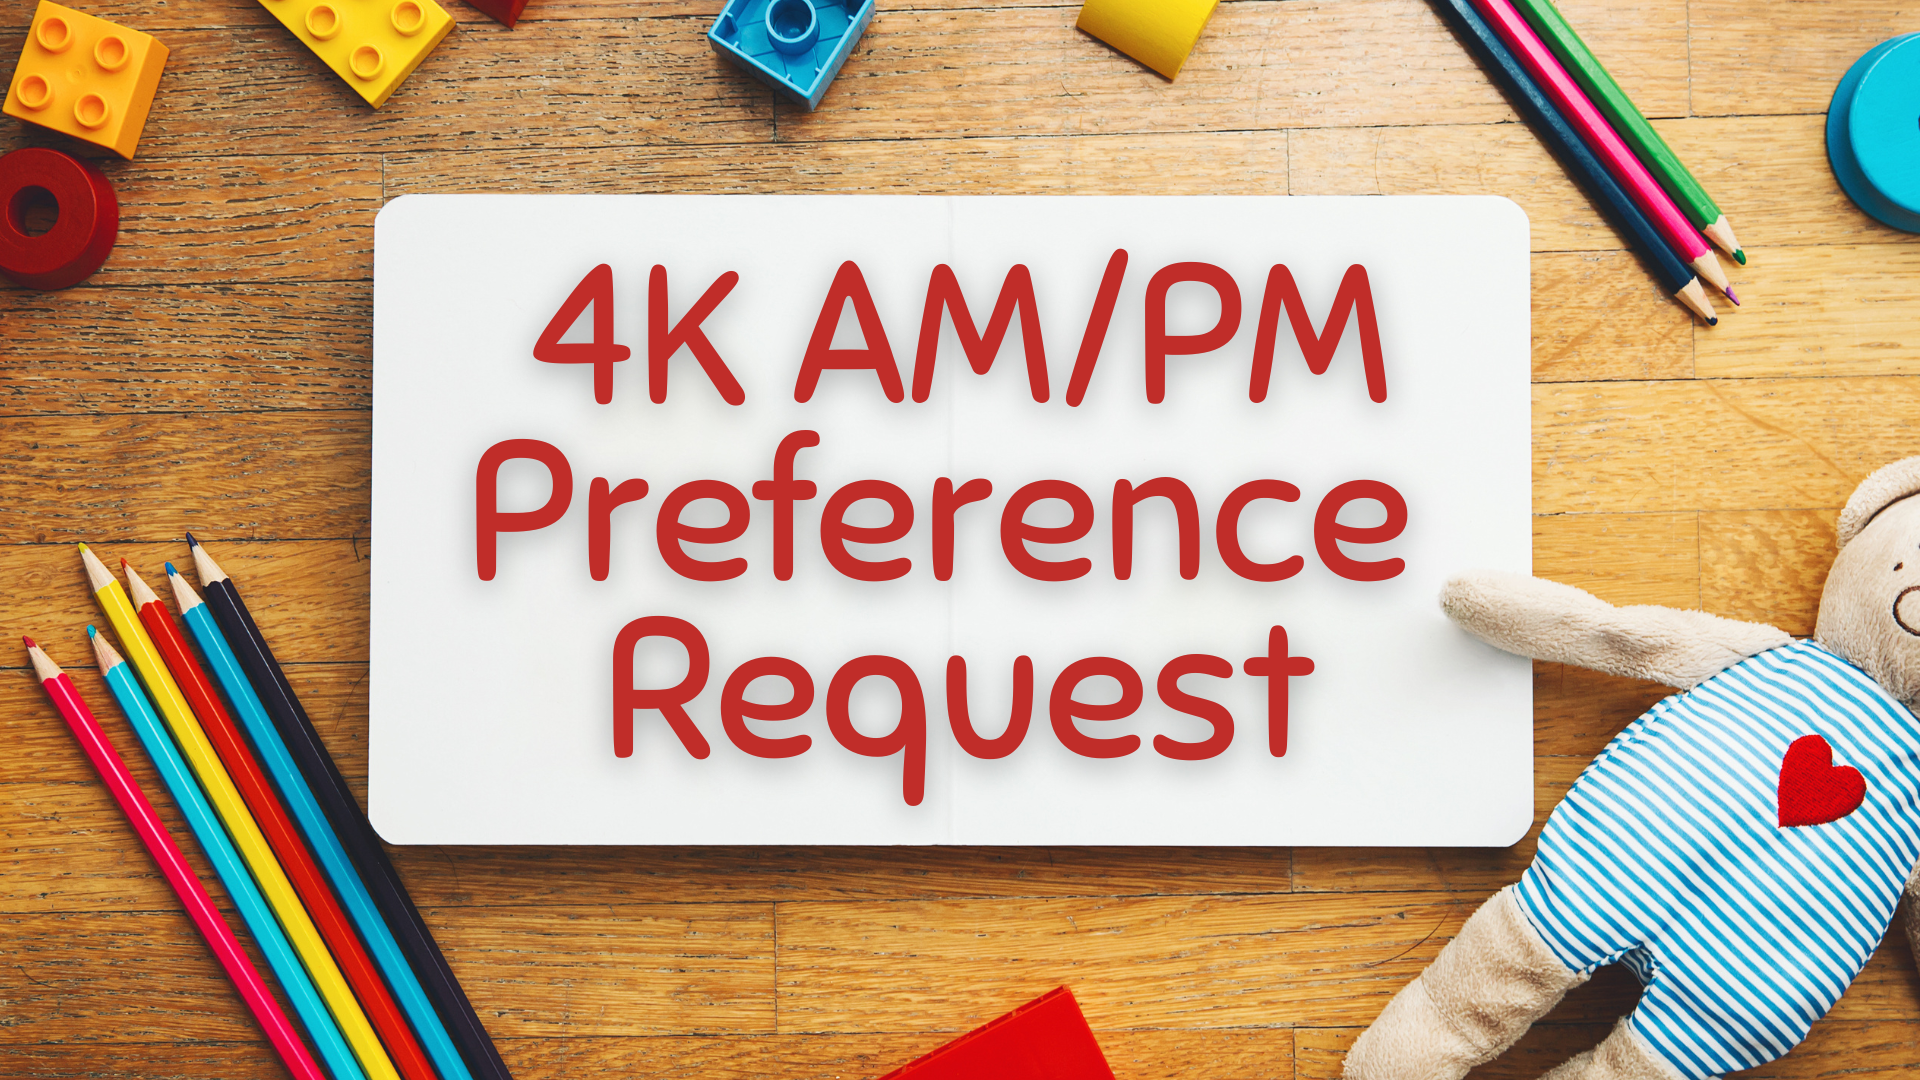 AM or PM 4K Request